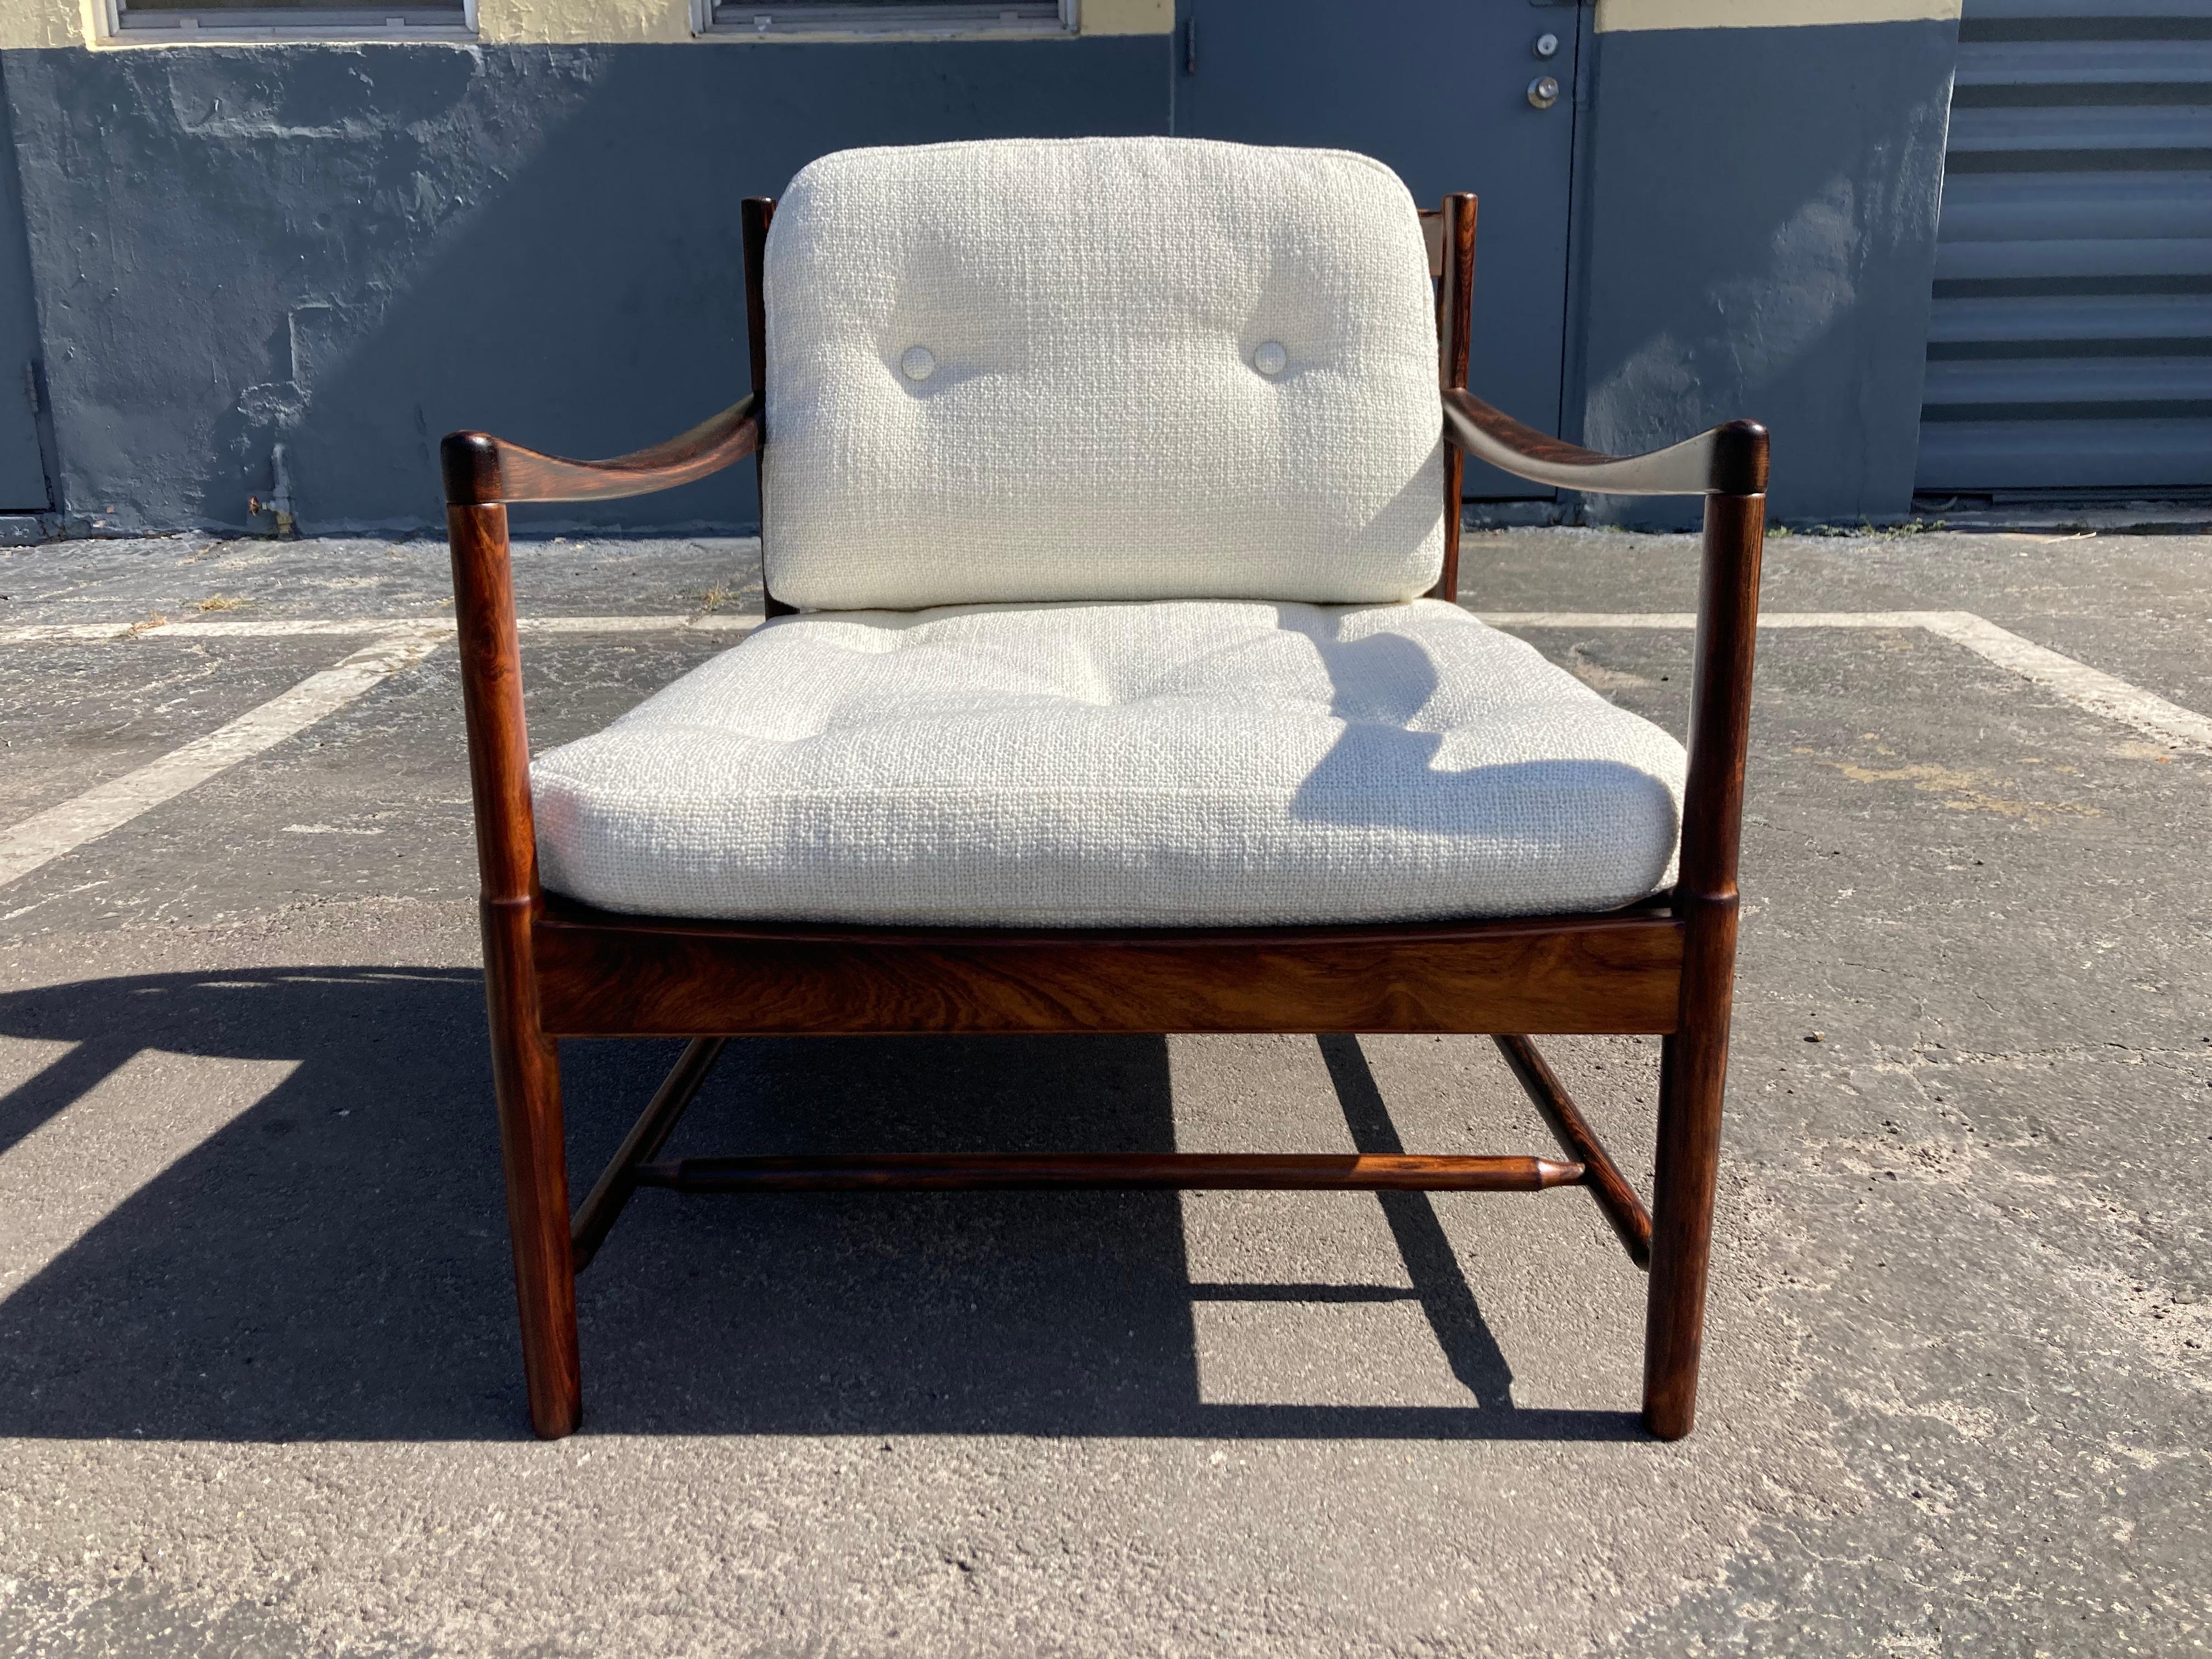 Pair of Rosewood Lounge Chairs Attributed to Kofod Larsen, Danish Modern For Sale 2